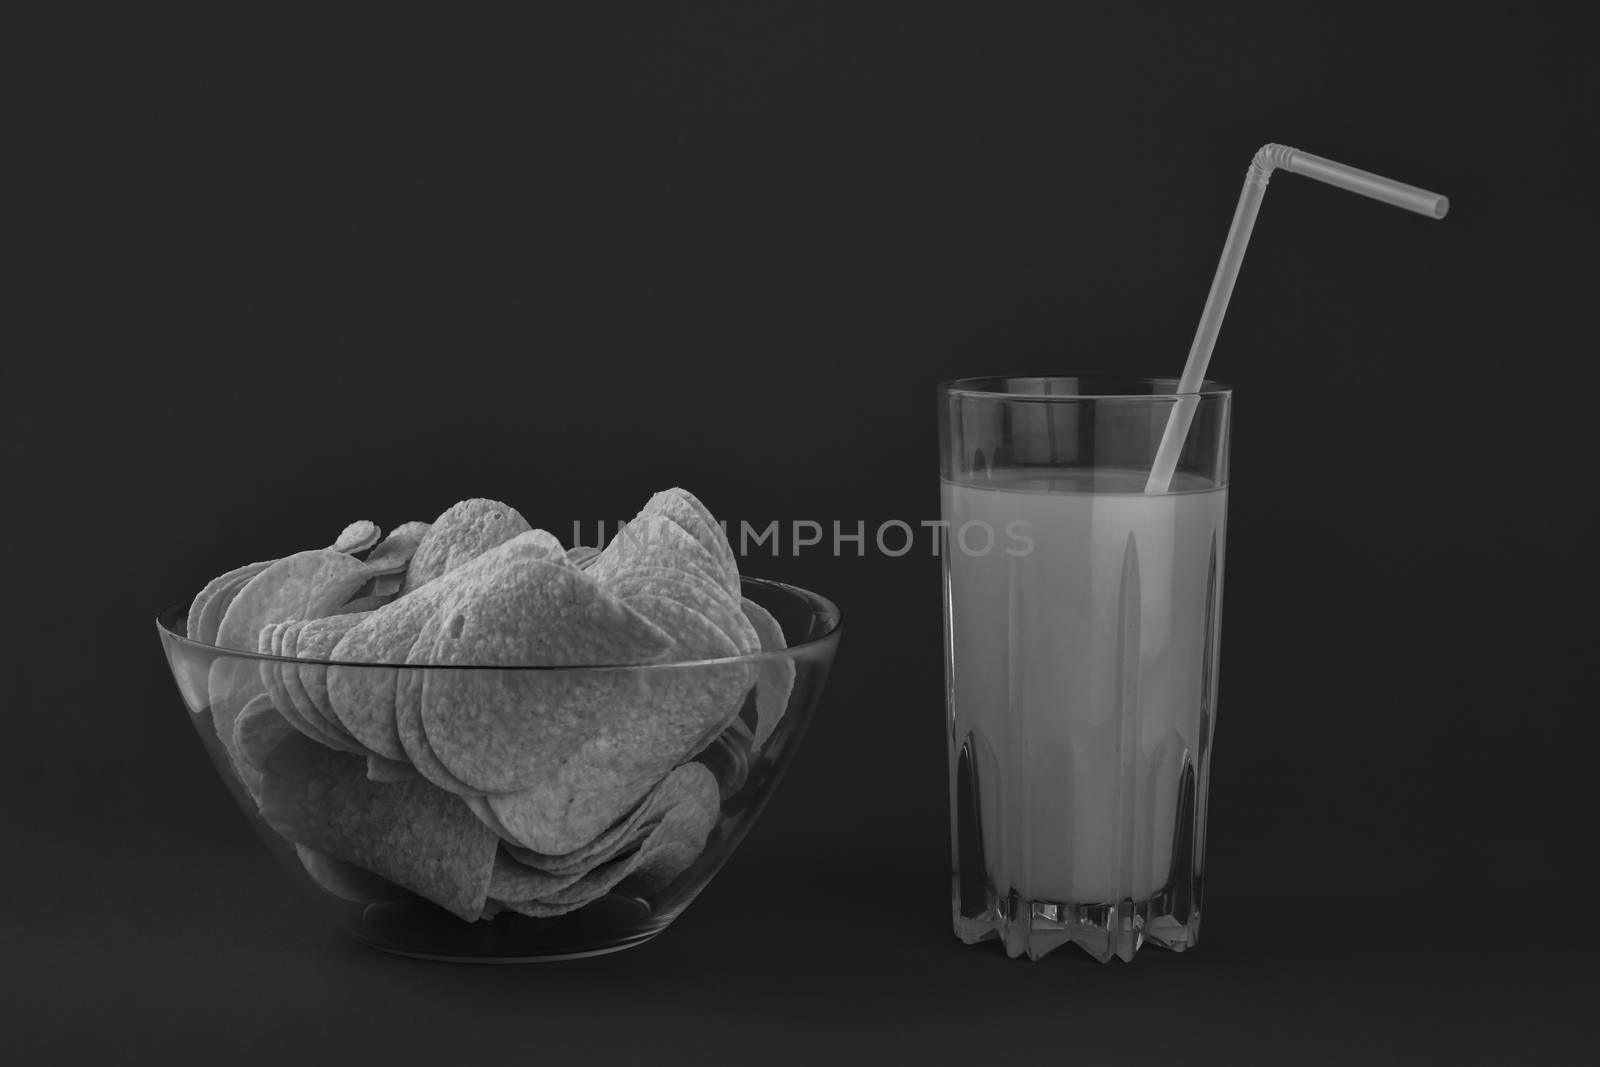 Bowl of potato chips and glass of orange drink in dark monochrom by photoboyko